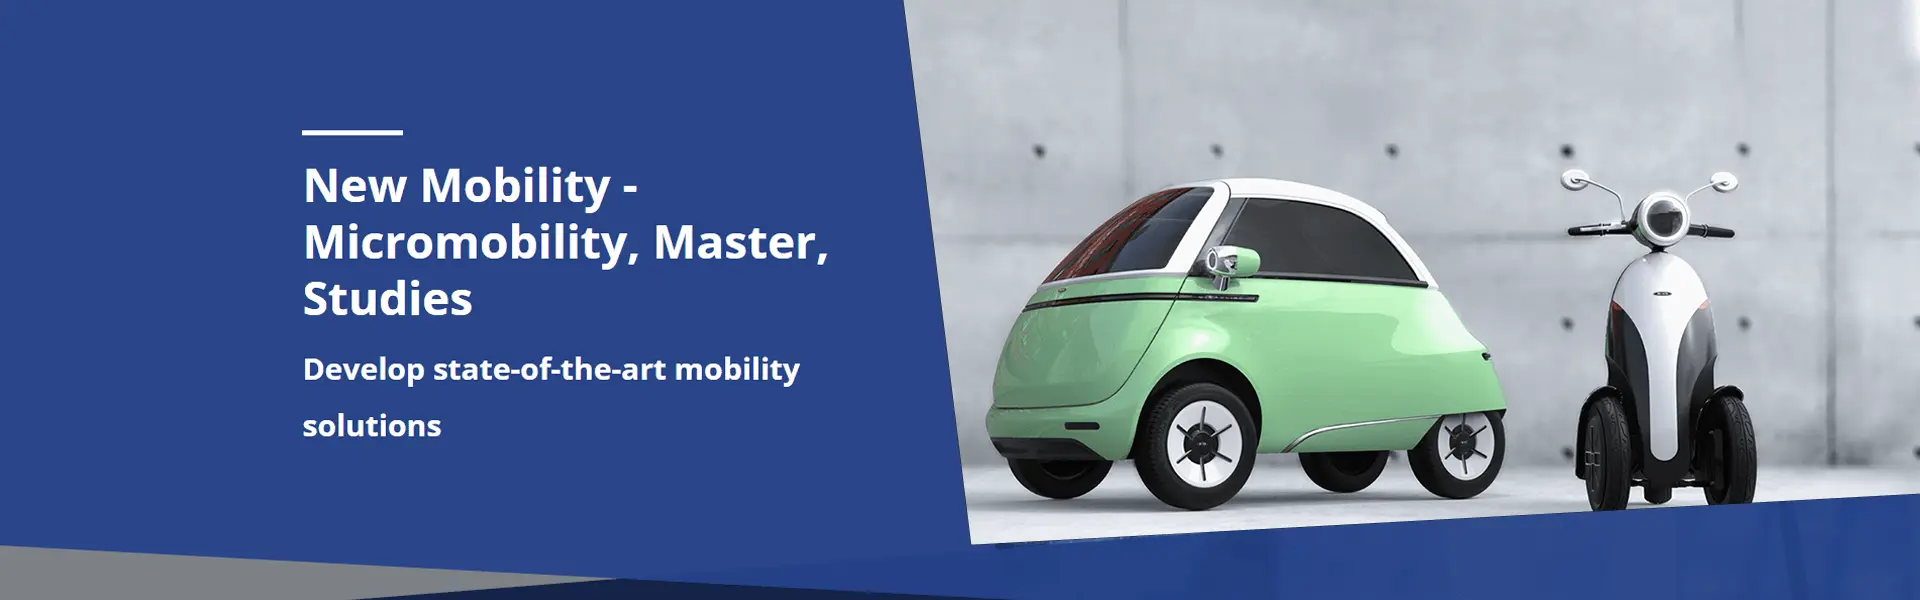 New Mobility - Micromobility